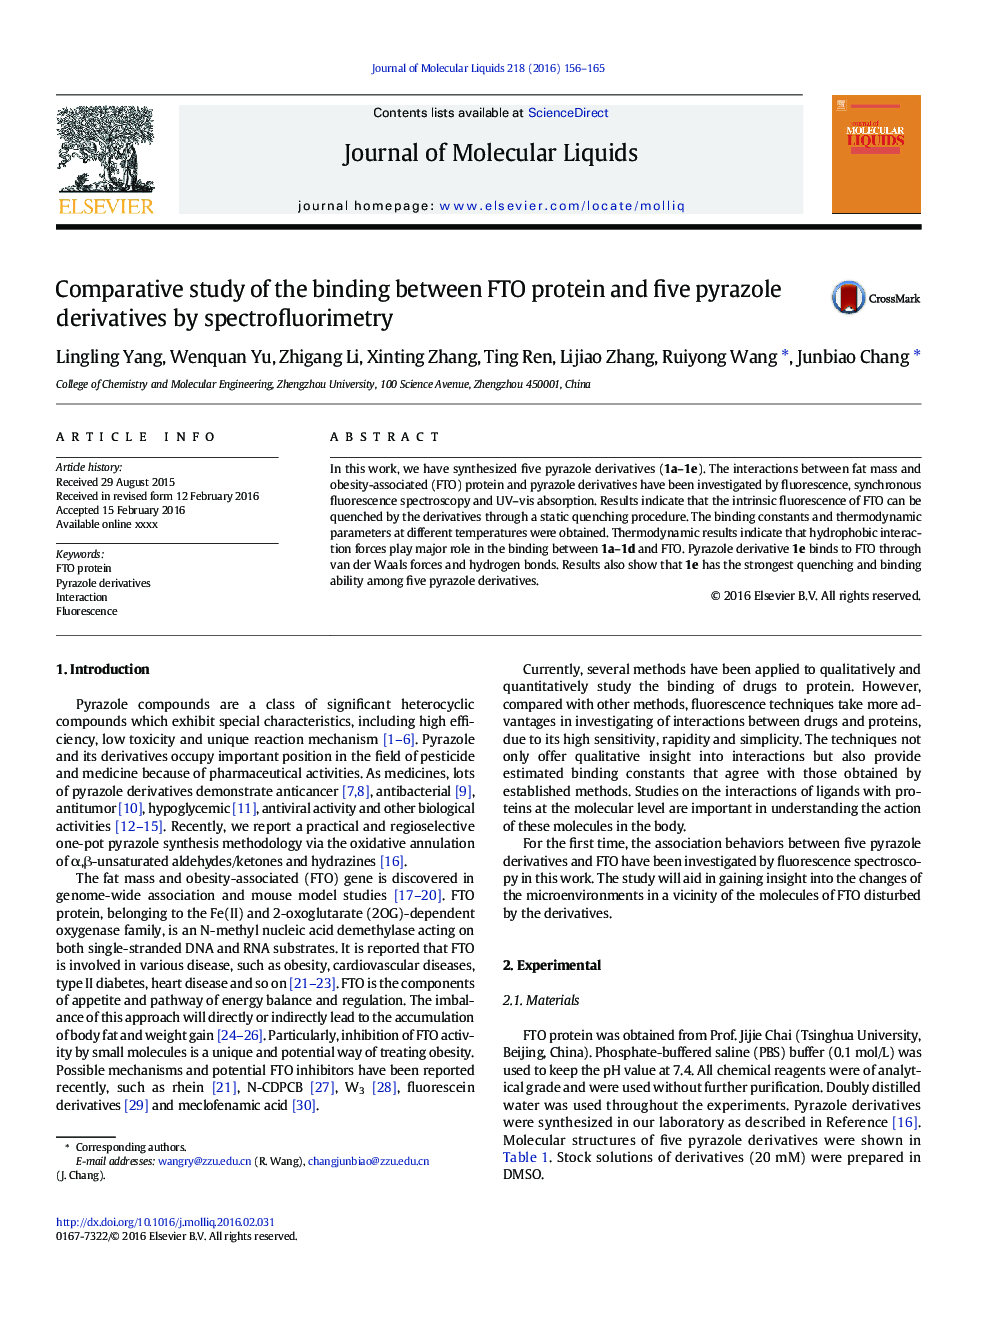 Comparative study of the binding between FTO protein and five pyrazole derivatives by spectrofluorimetry